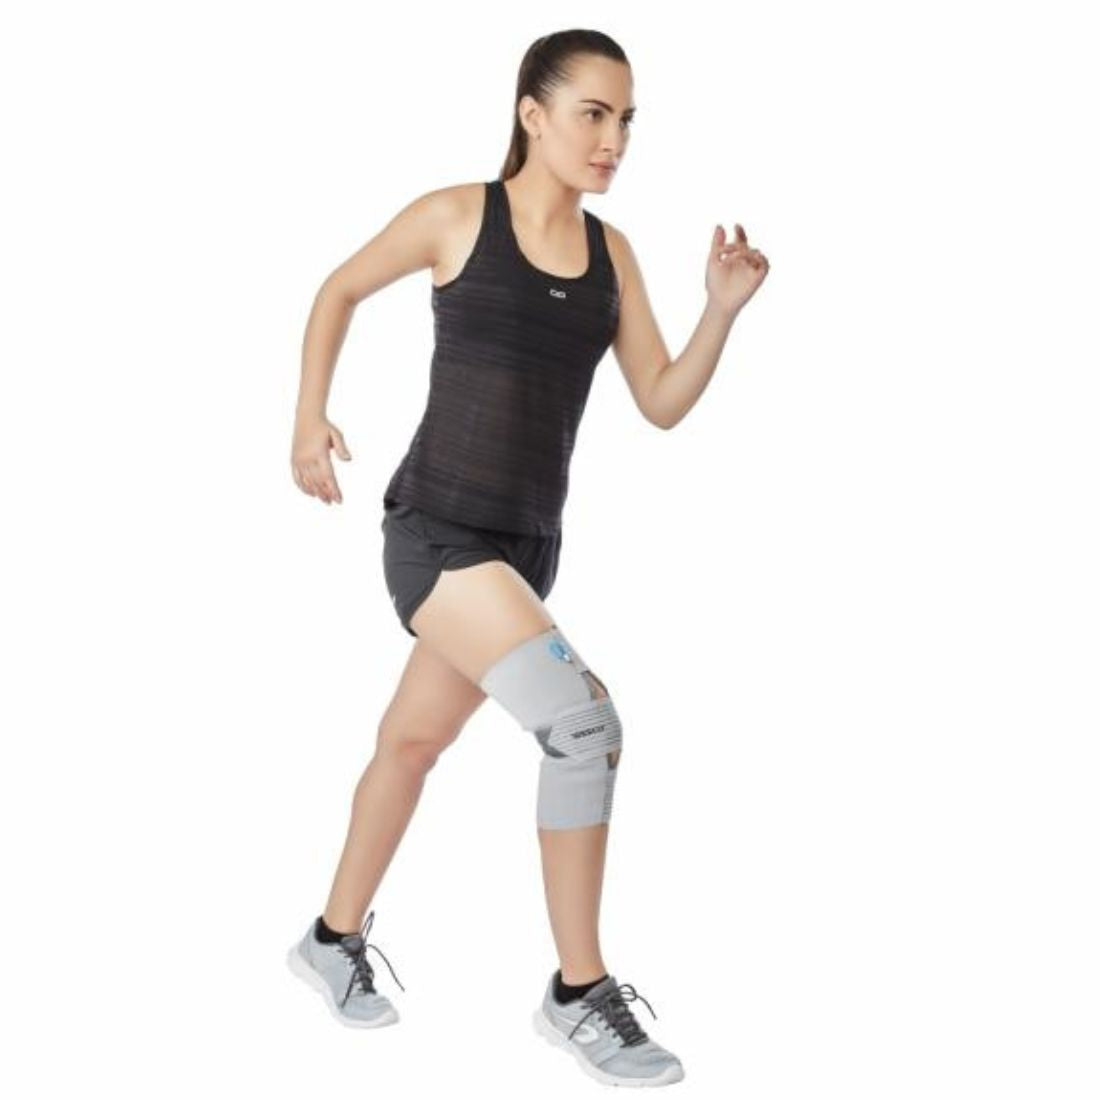 Vissco Knee Wrap with Loop Elastic Technology Which Provides optimum Compression & support to the Knee